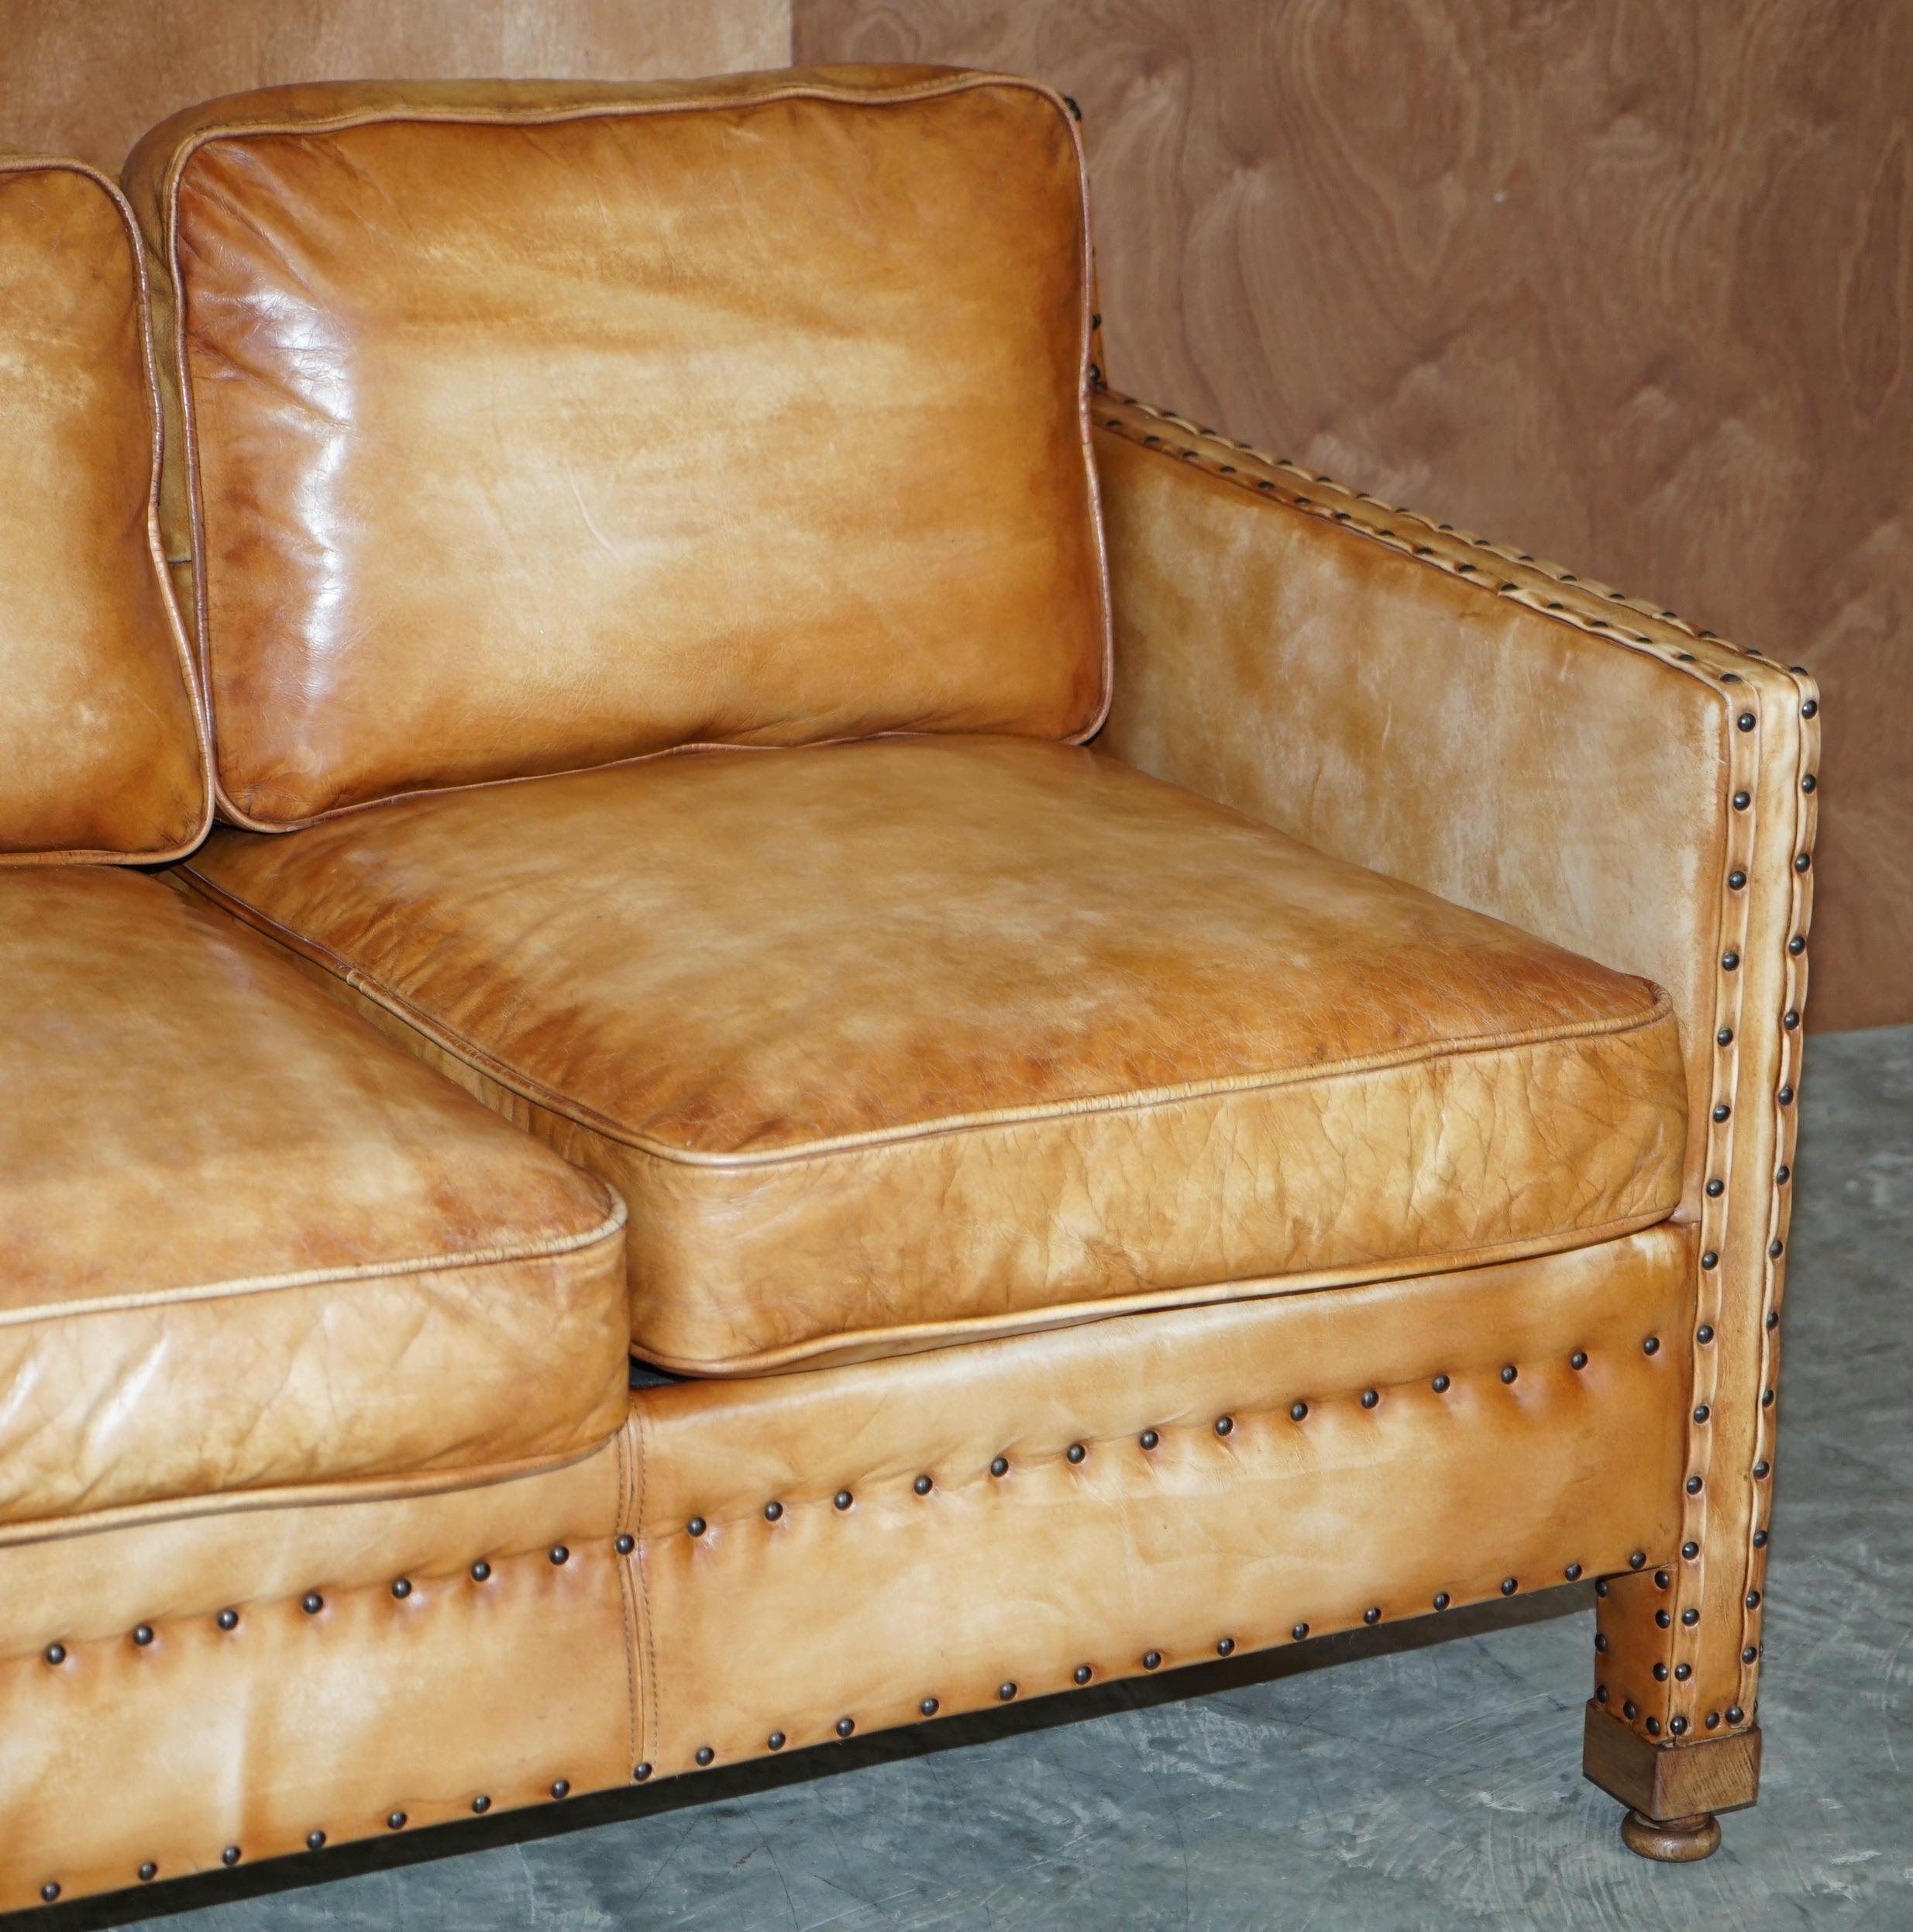 studded leather couch